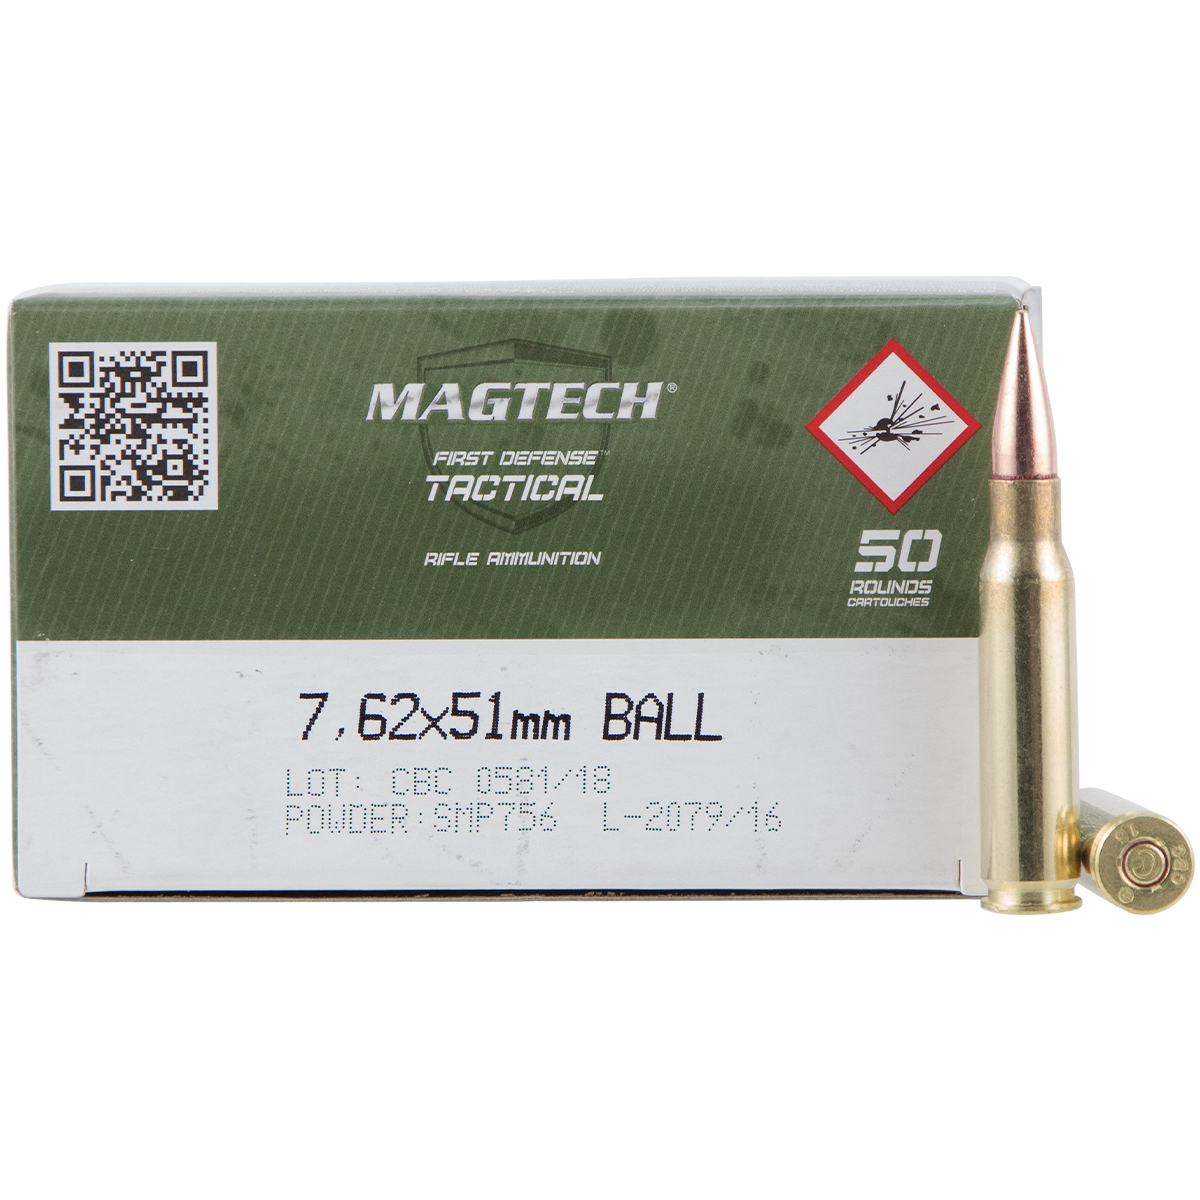 Magtech 762A Tactical/Training  7.62x51mm NATO 147 gr Full Metal Jacket (FMJ) 50 Bx Rifle Ammo